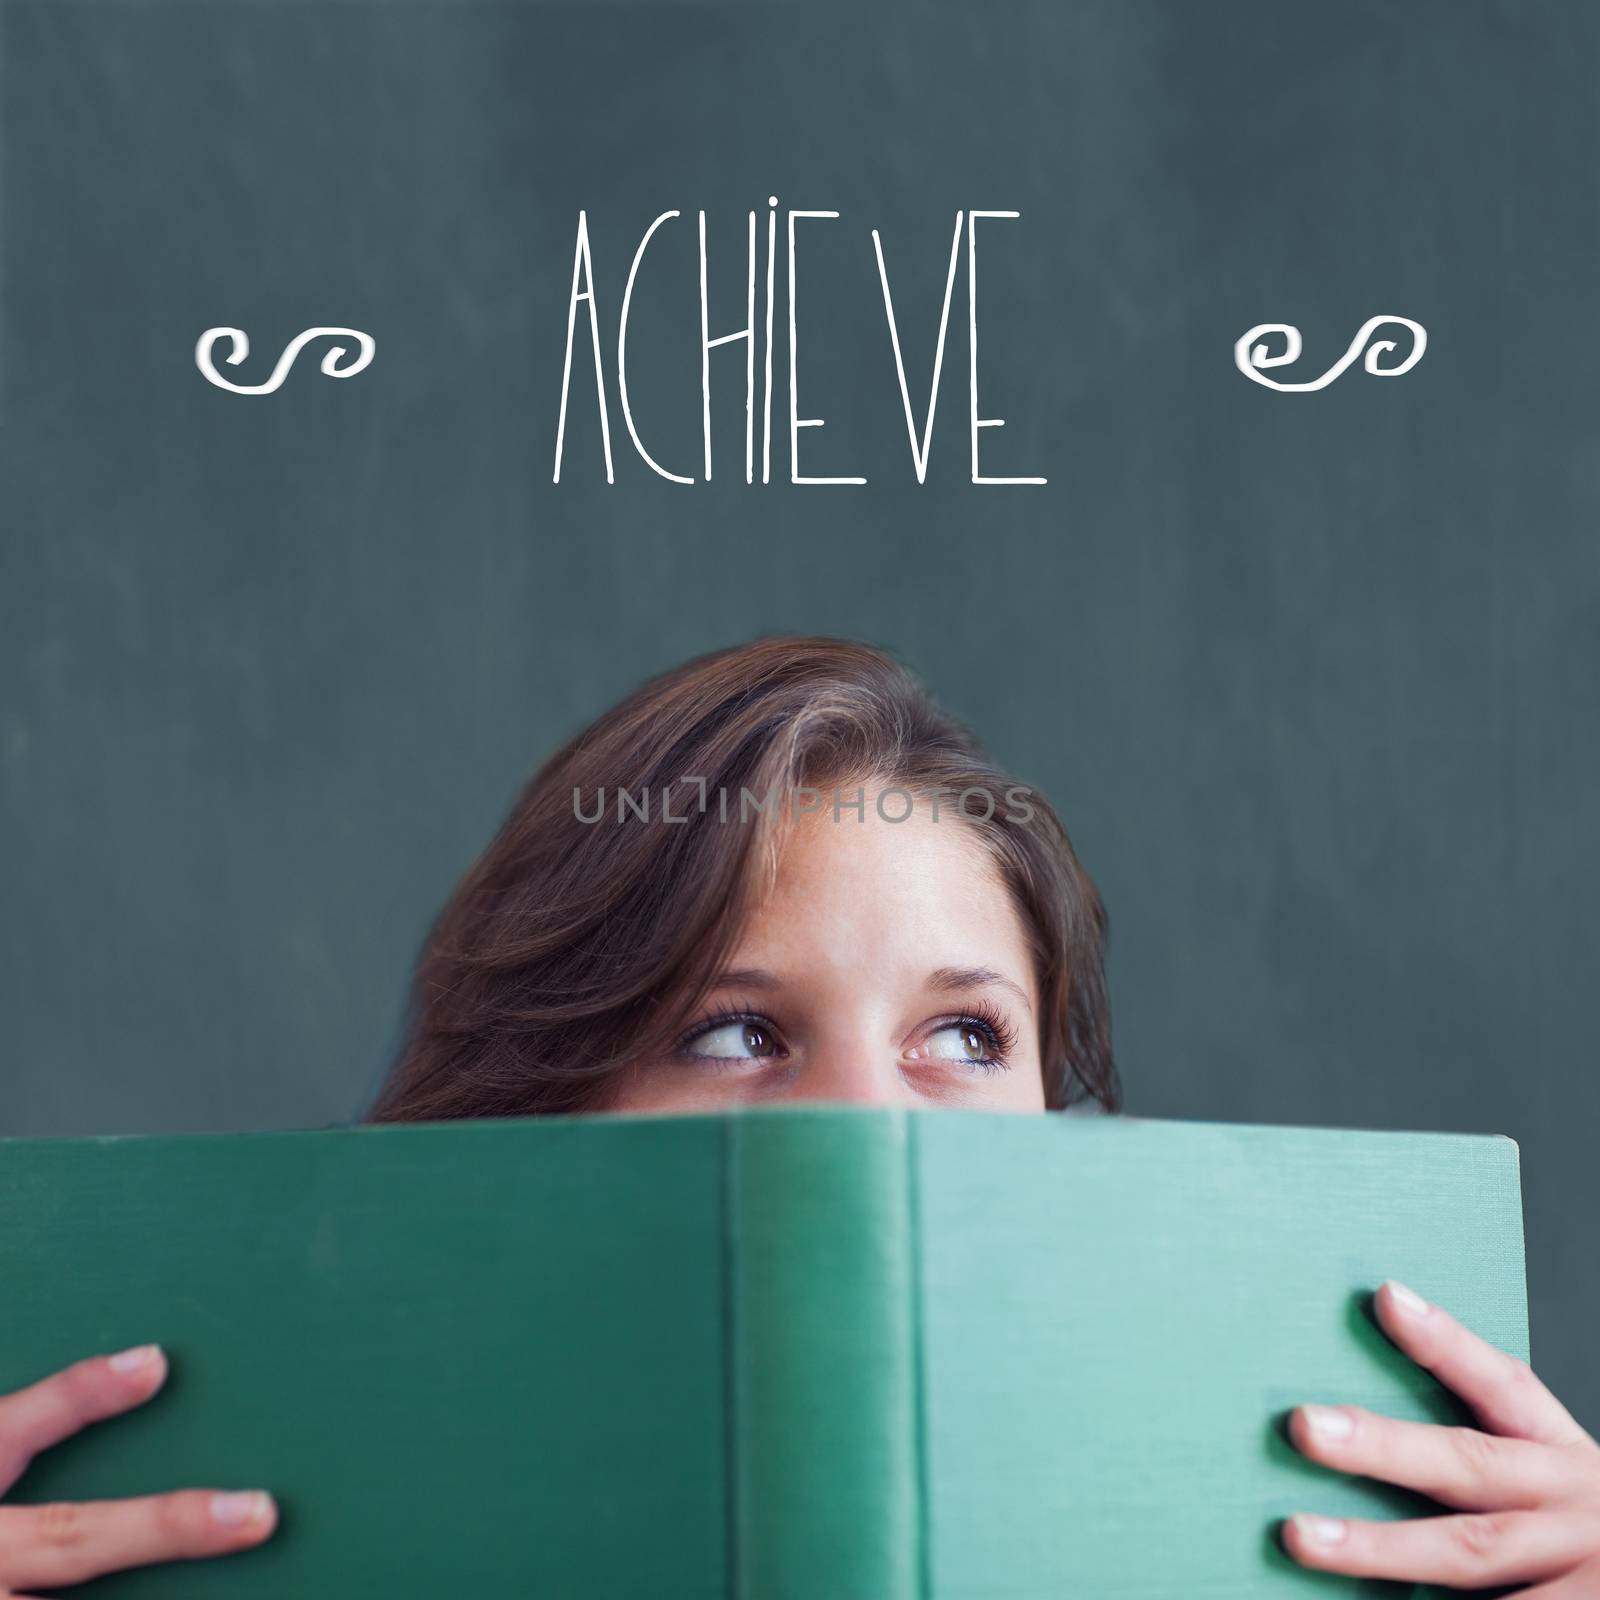 The word achieve against student holding book